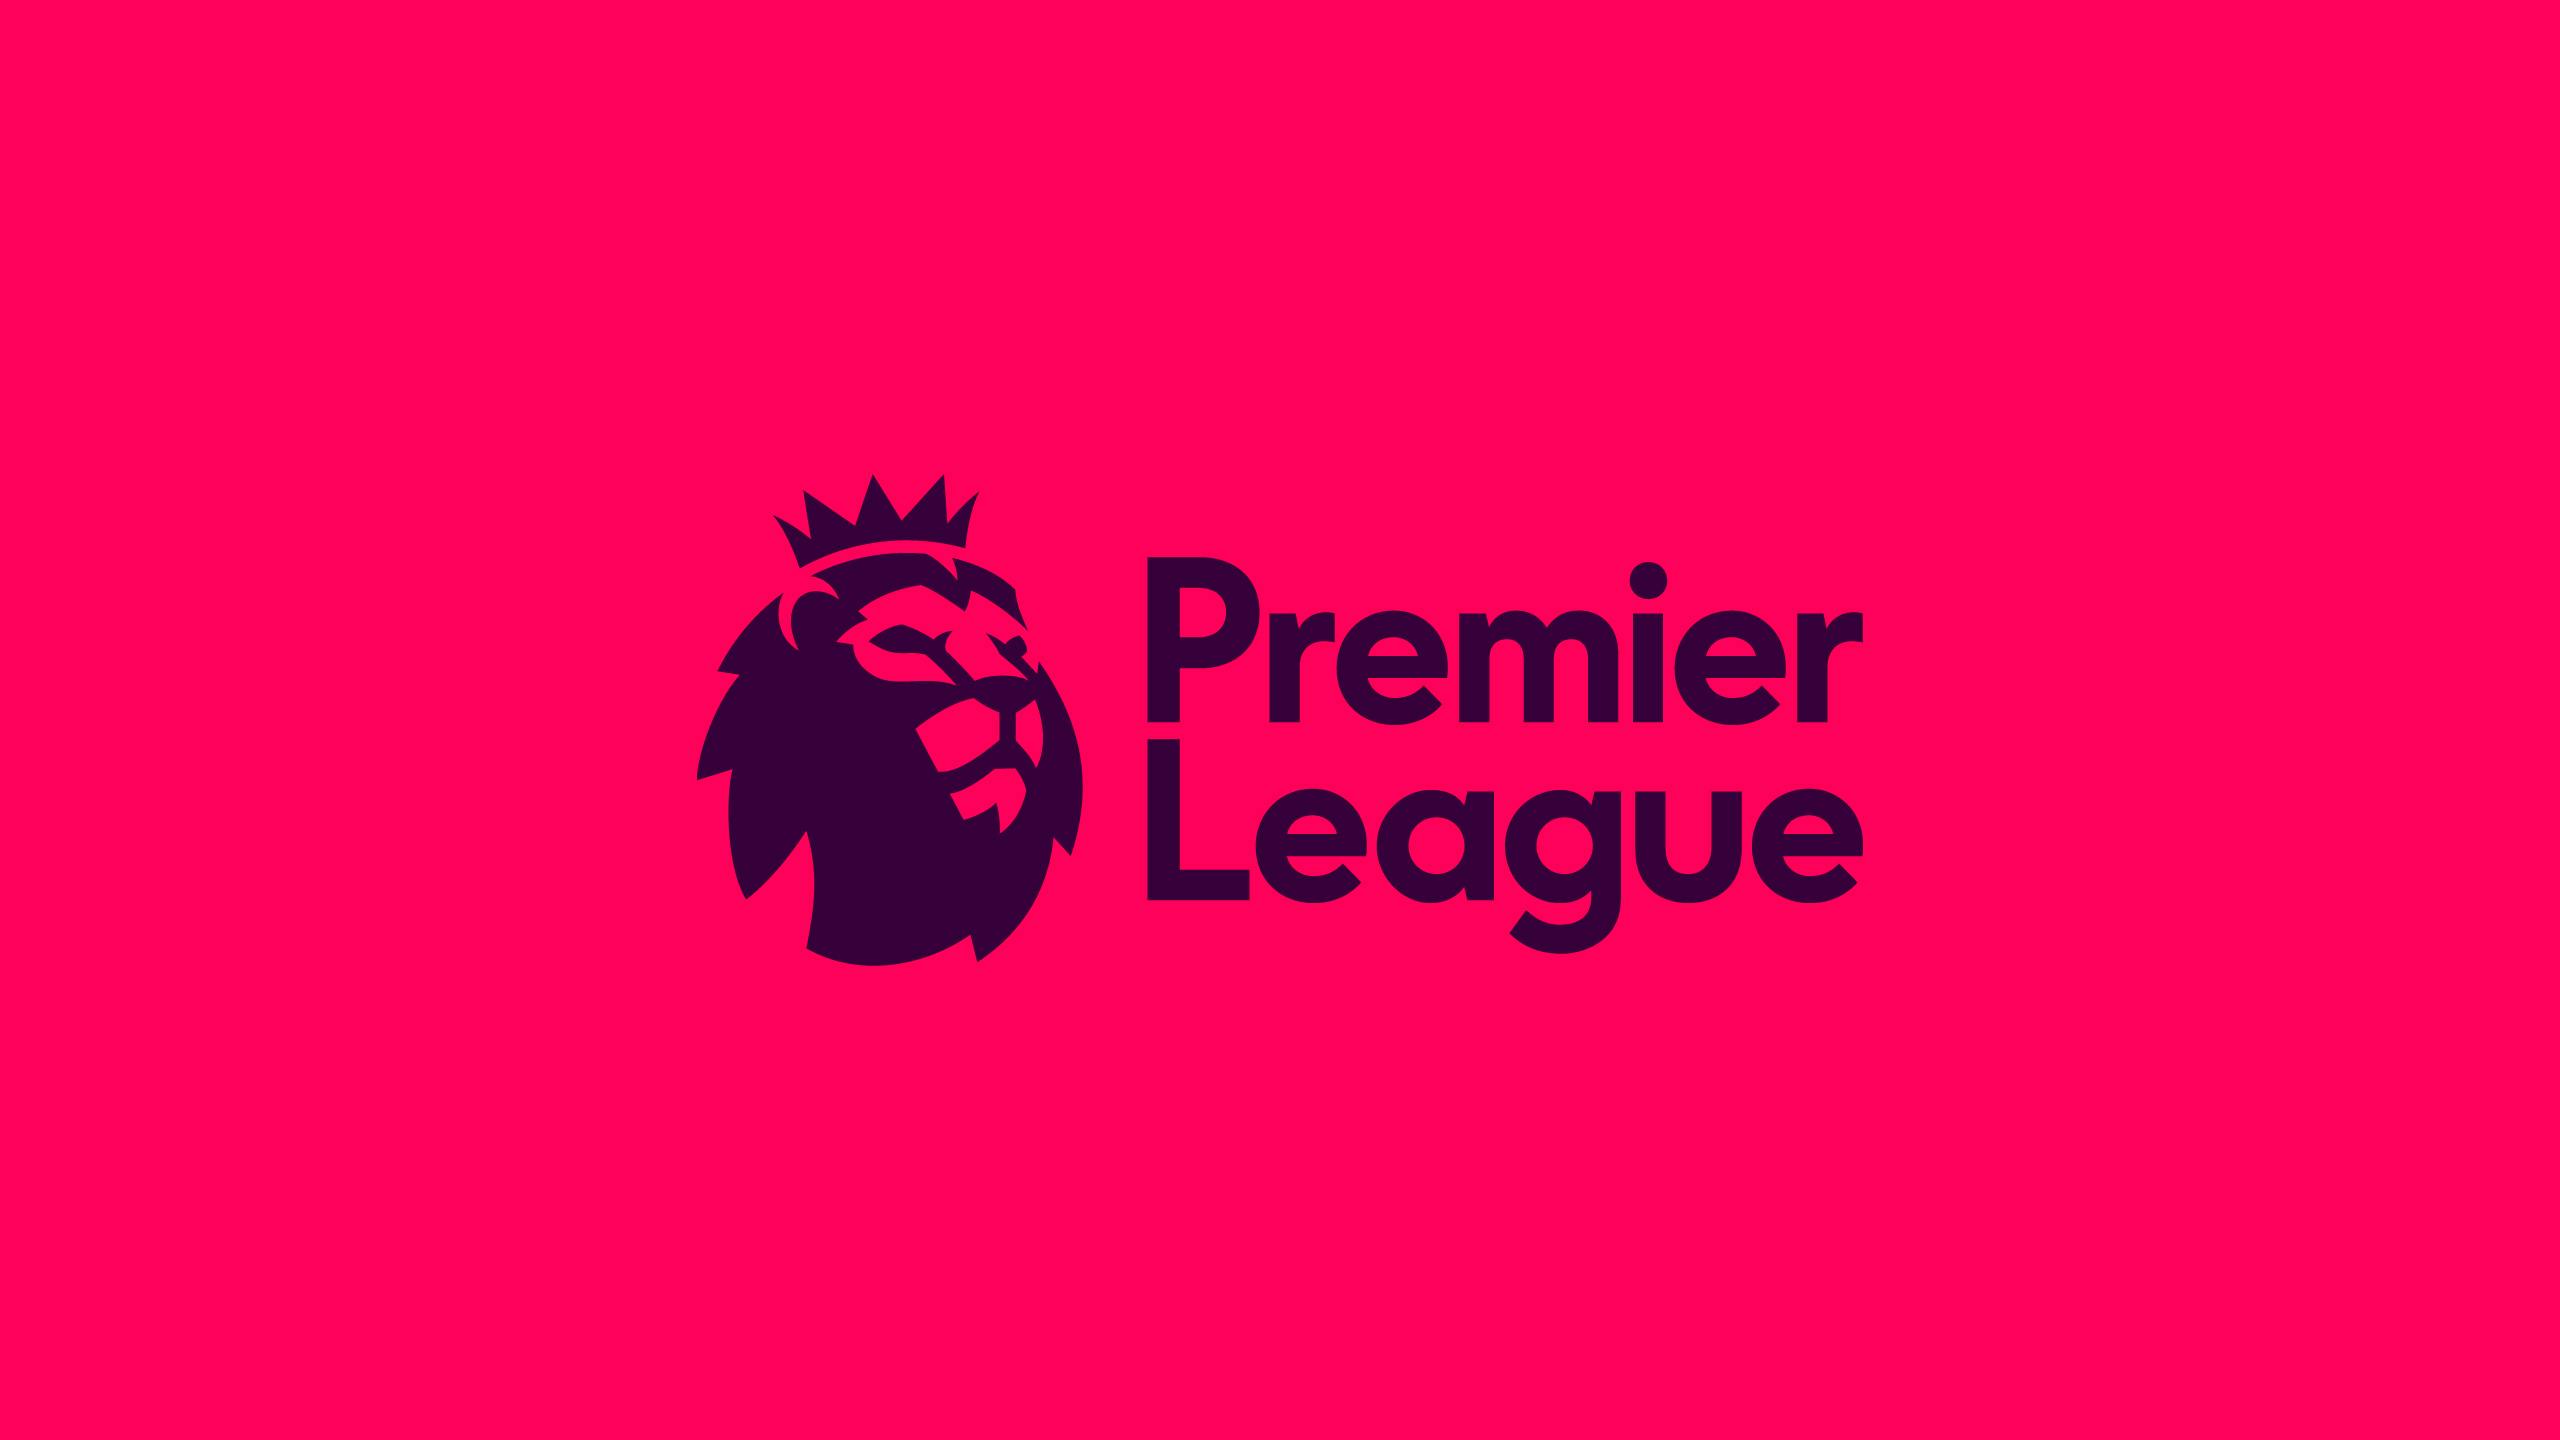 Premier League Scandal: Young Players Arrested on Rape Allegations